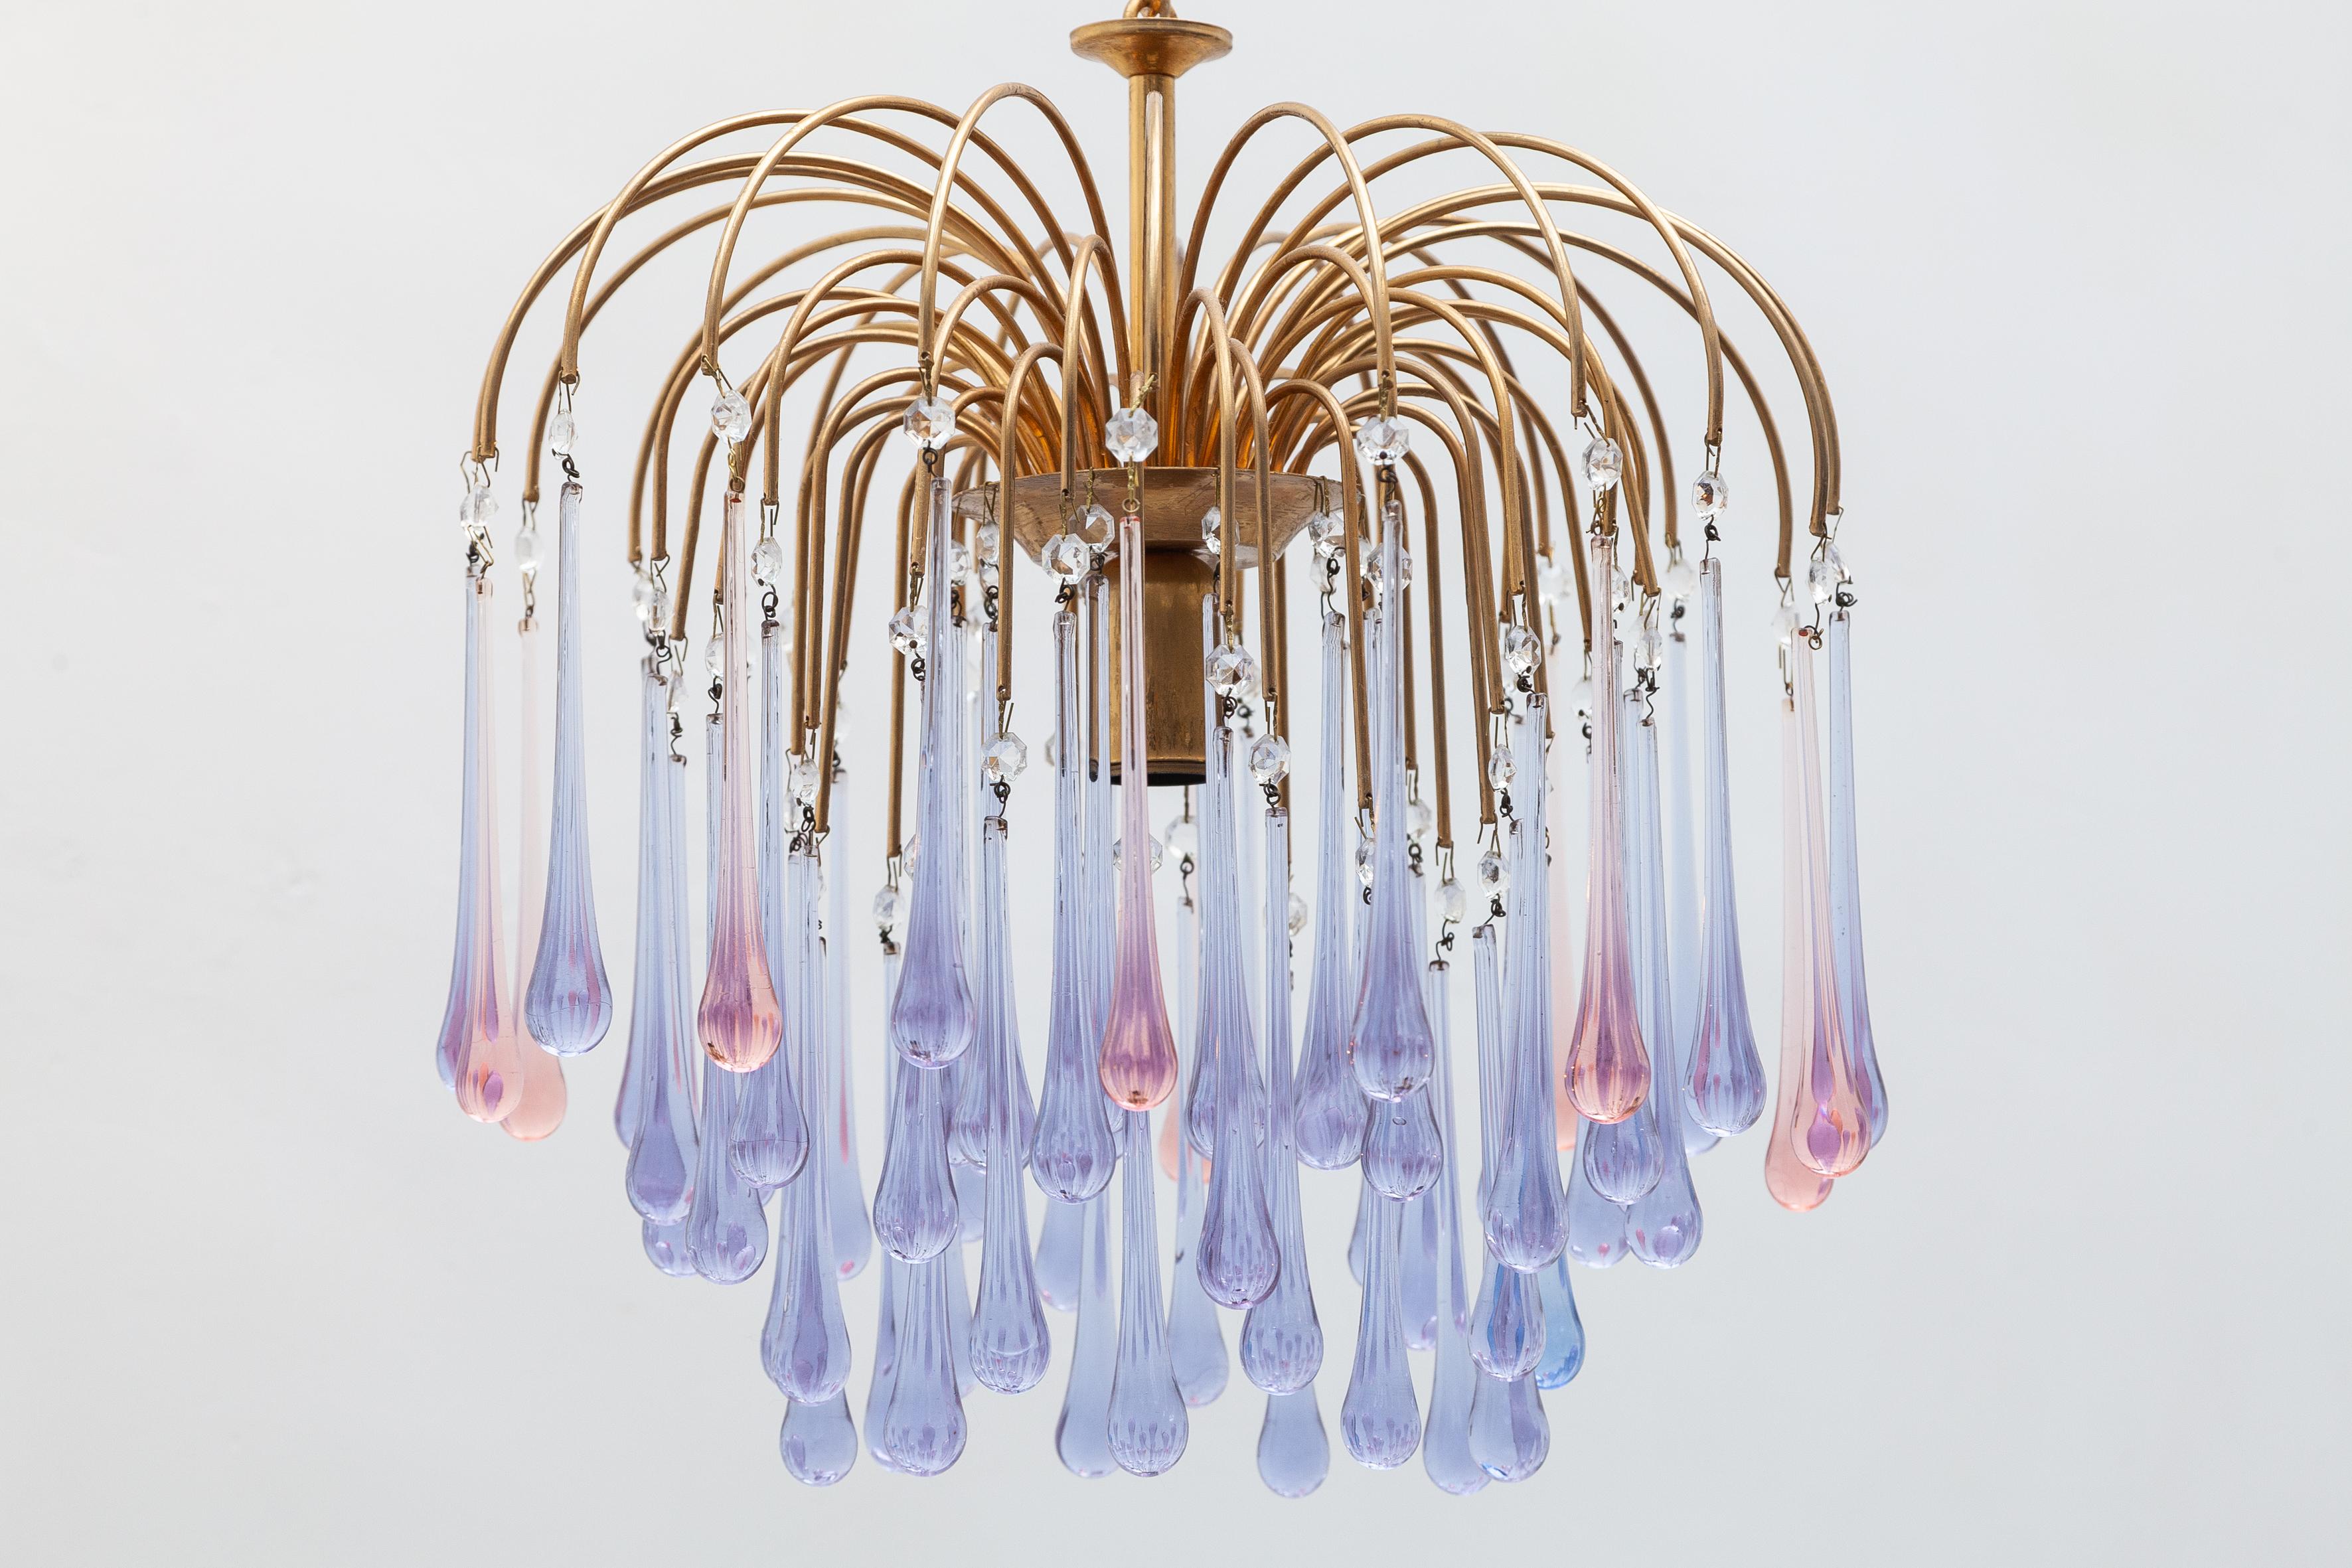 Glass teardrop 1970s chandelier designed by Venini, Murano. Bright brass frames suspend crystal drops in beautiful shades of
lavender, pink and smoked glass. Both lit by 1 bulb, Dimension: 44 W x 90 H x 44 D cm 

One smaller chandelier available.